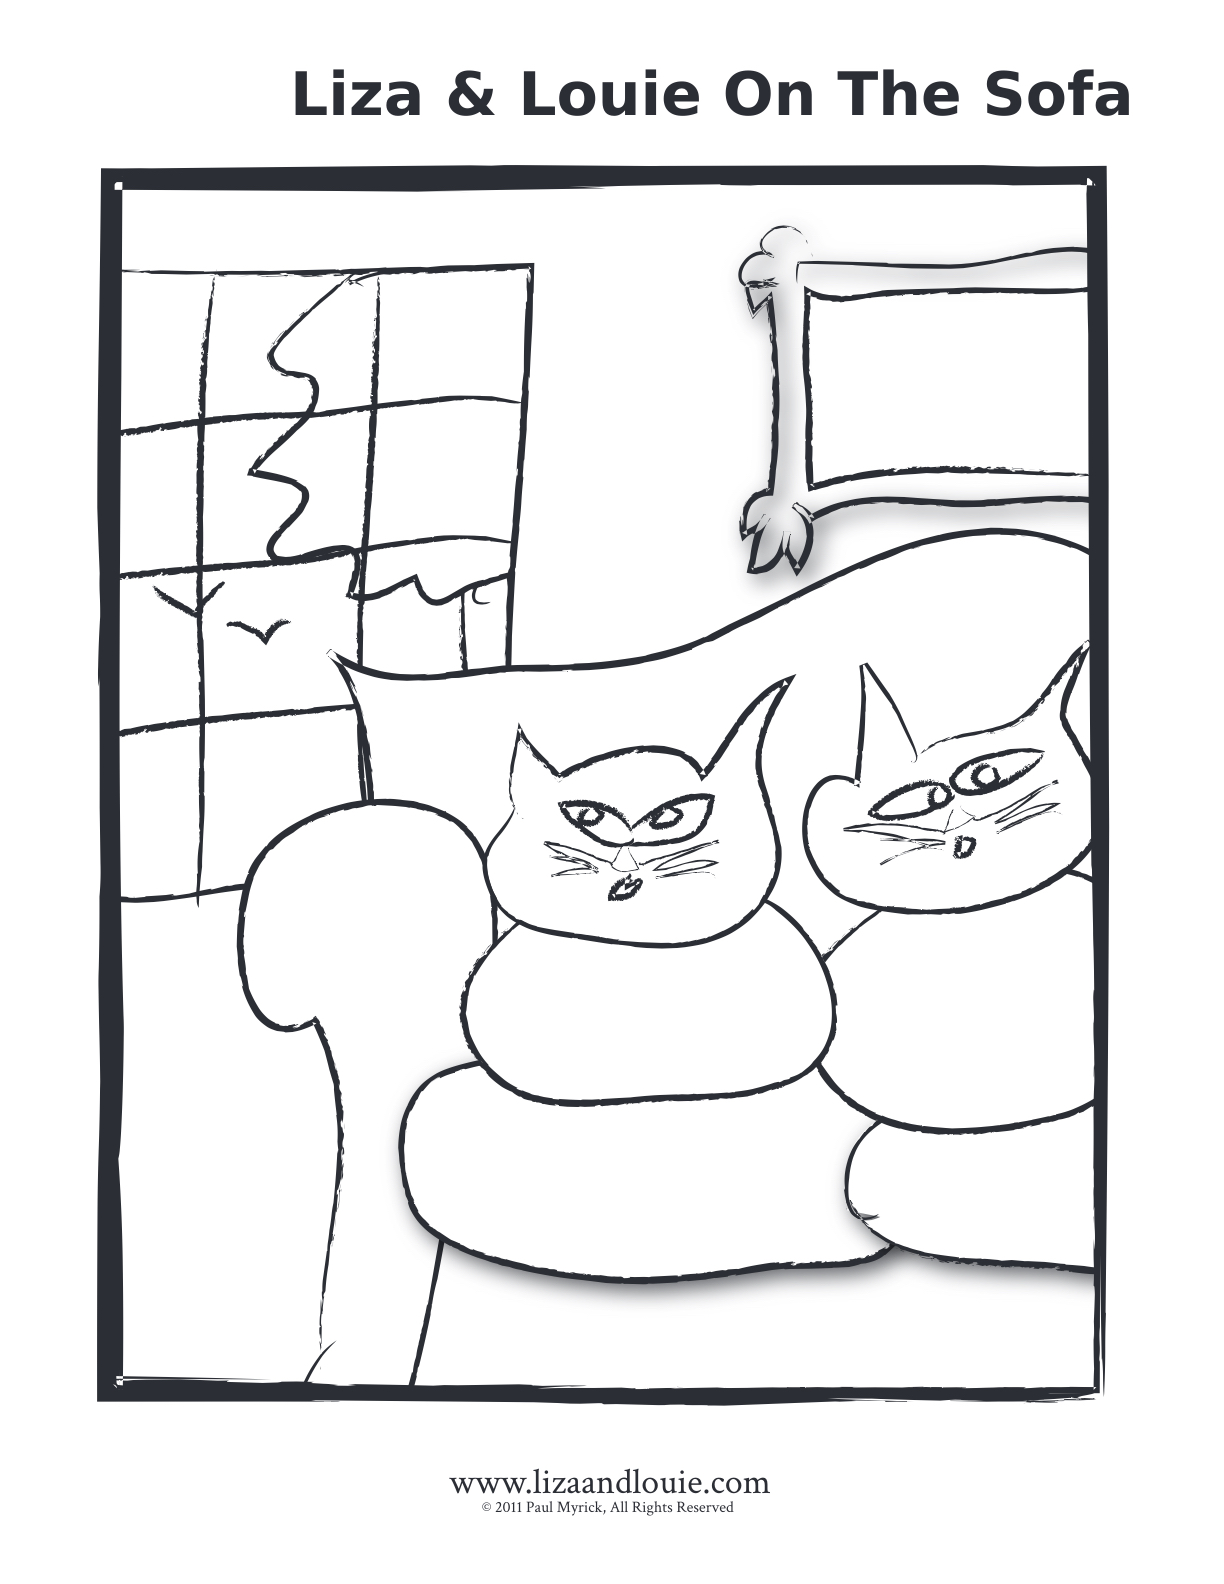 Liza & Louie on the sofa coloring page. Black and white drawing of two cats sitting on a sofa while looking out a window.